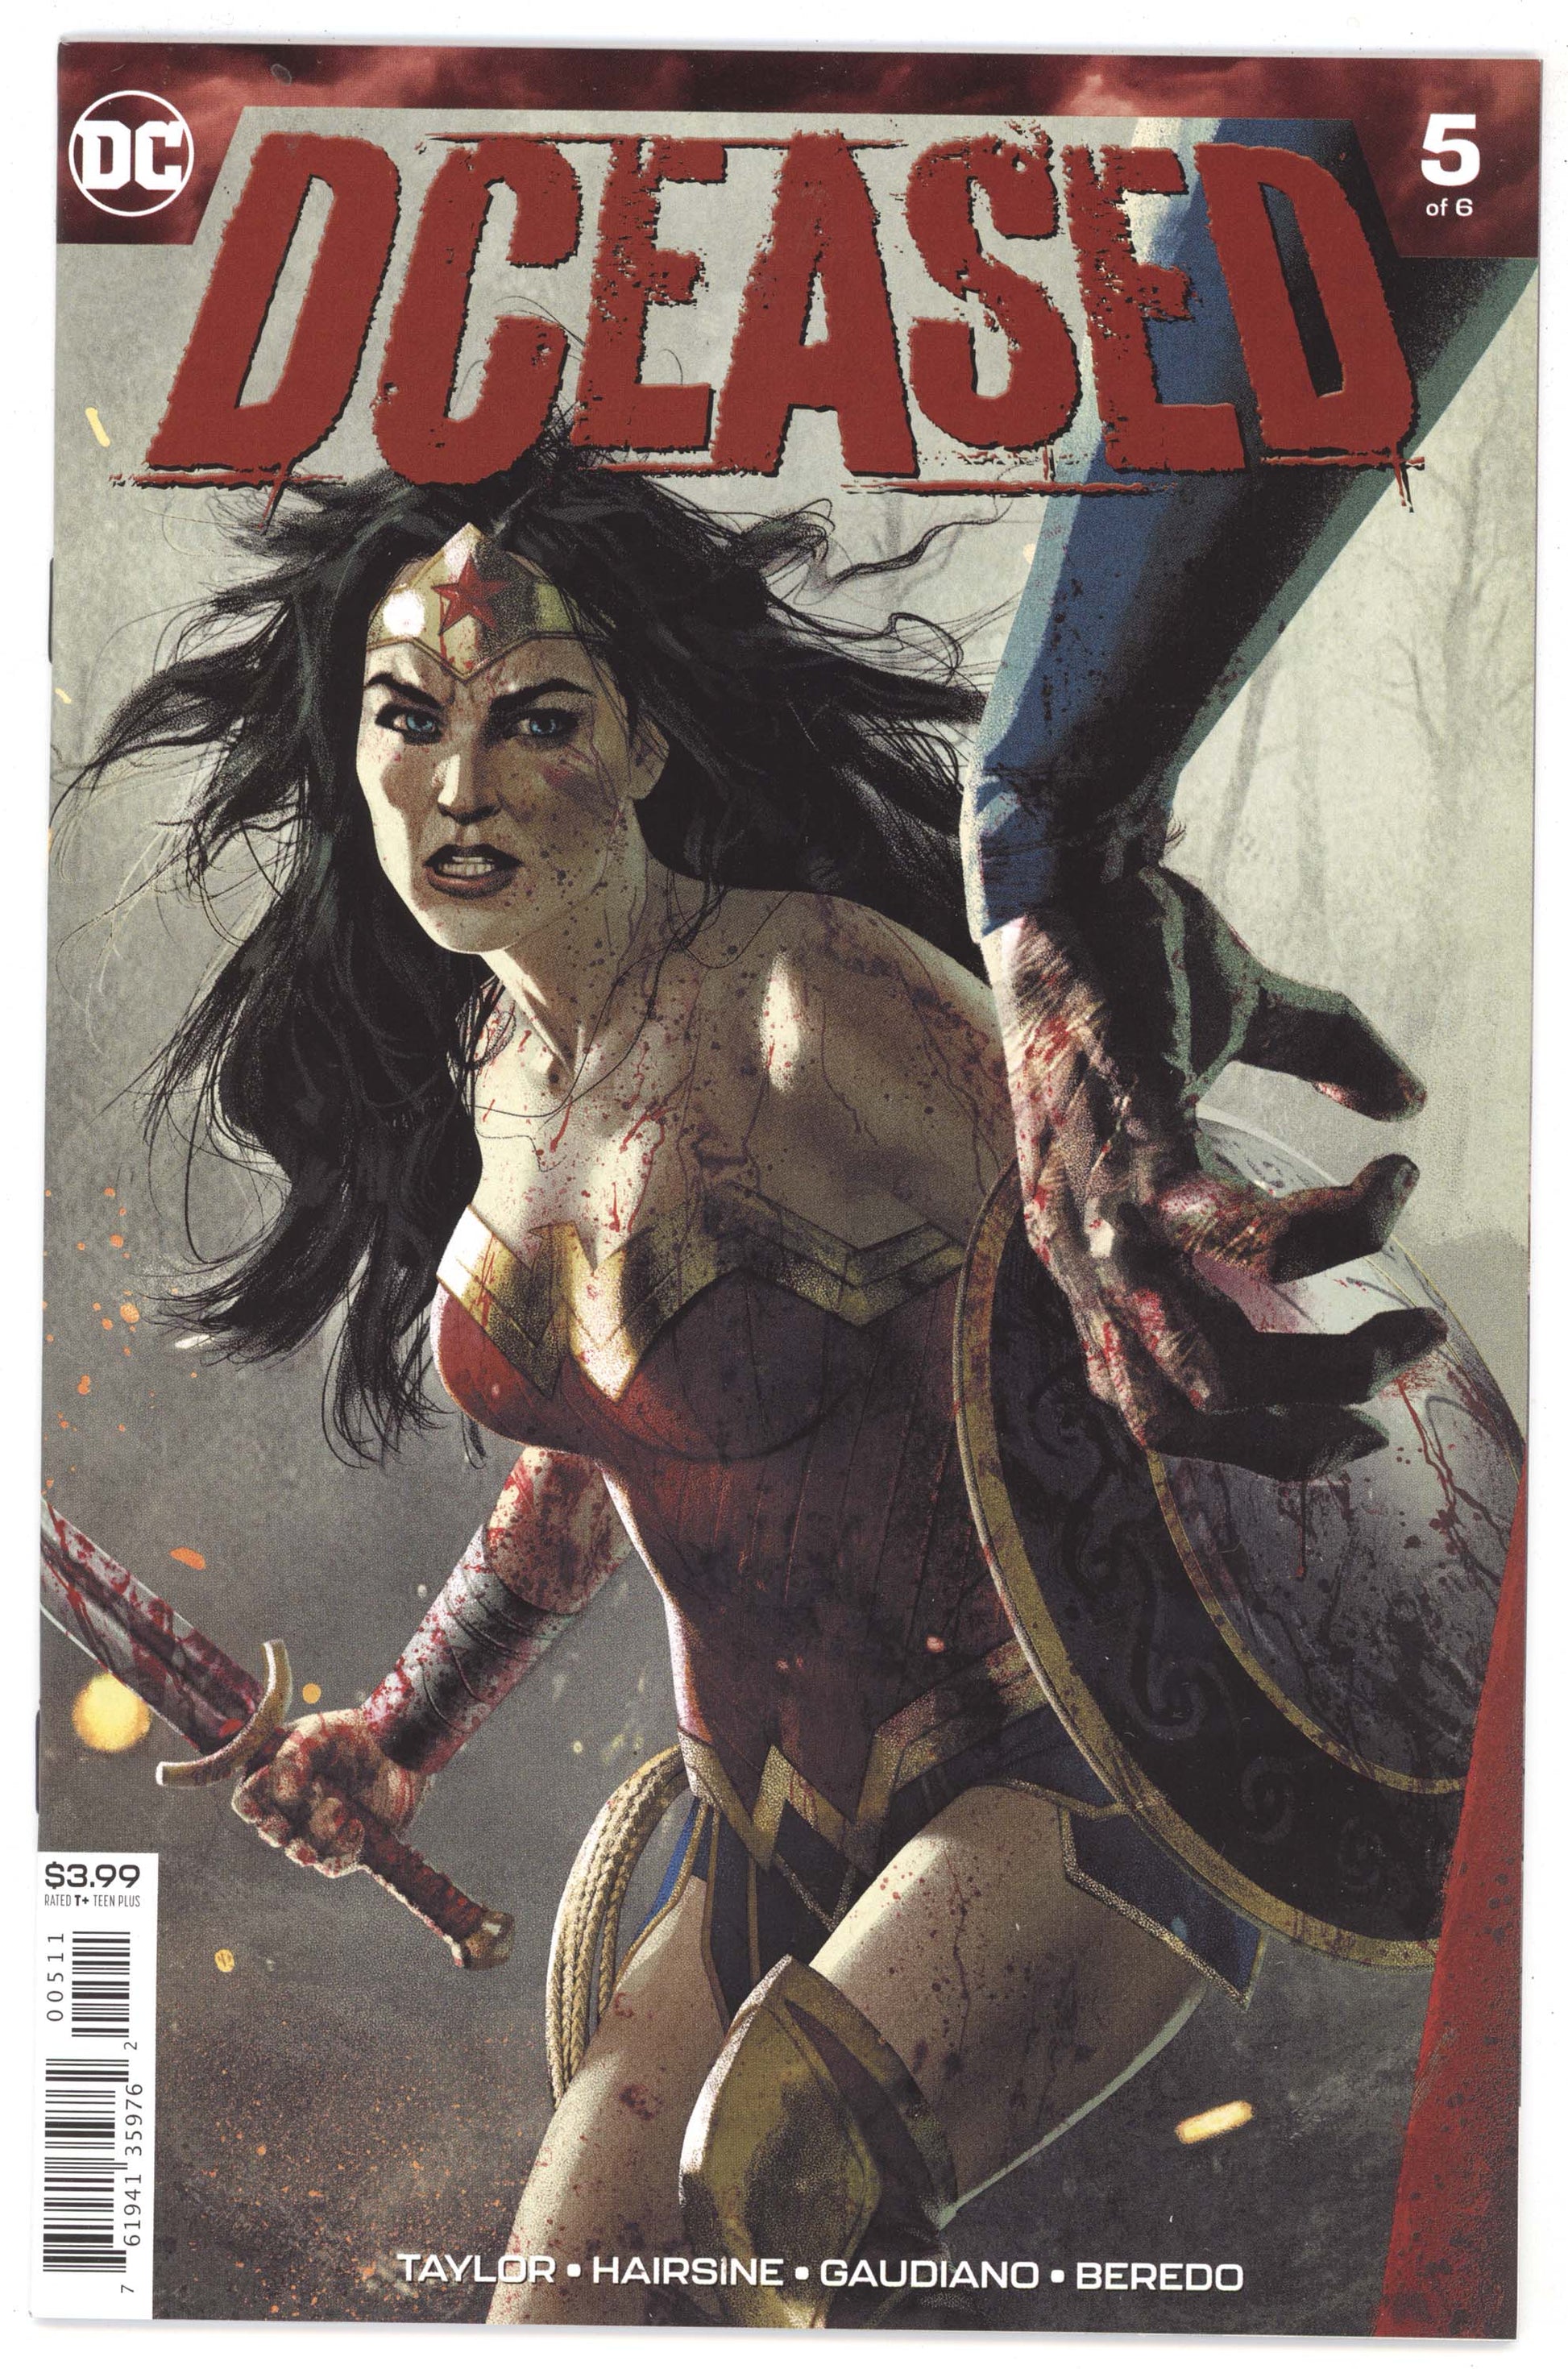 Dceased #2 C Values and Pricing, DC Comics